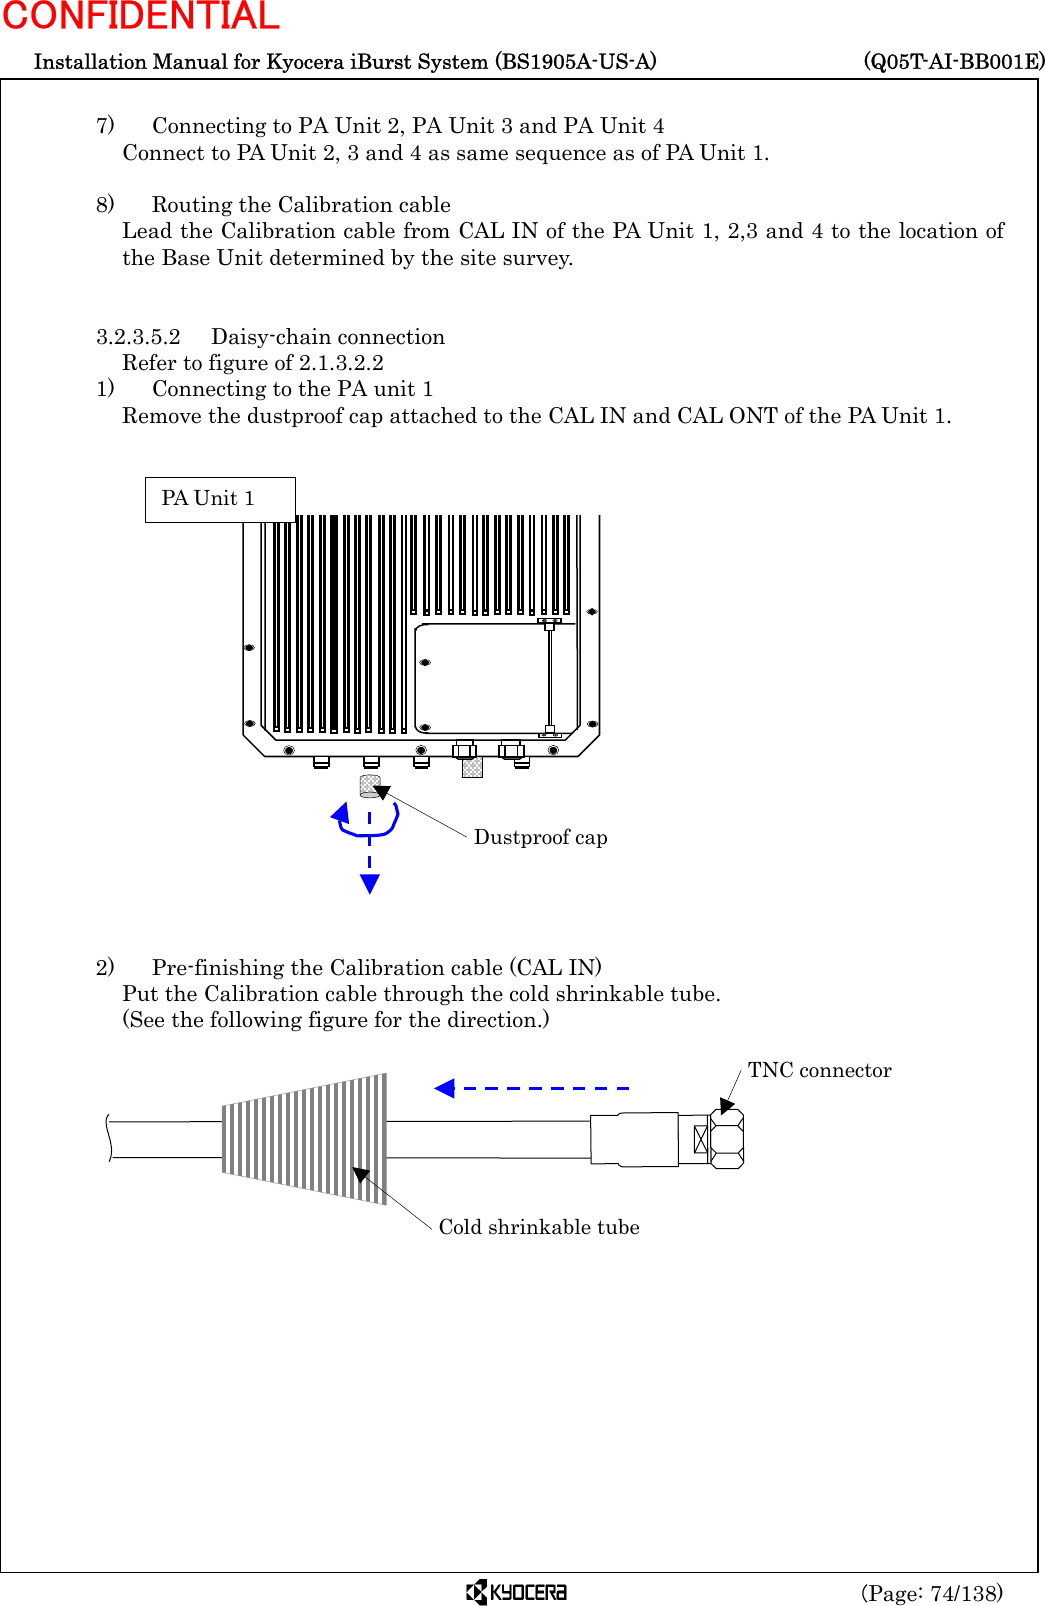  Installation Manual for Kyocera iBurst System (BS1905A-US-A)     (Q05T-AI-BB001E) (Page: 74/138) CONFIDENTIAL  7)    Connecting to PA Unit 2, PA Unit 3 and PA Unit 4 Connect to PA Unit 2, 3 and 4 as same sequence as of PA Unit 1.  8)    Routing the Calibration cable Lead the Calibration cable from CAL IN of the PA Unit 1, 2,3 and 4 to the location of the Base Unit determined by the site survey.     3.2.3.5.2 Daisy-chain connection Refer to figure of 2.1.3.2.2 1)    Connecting to the PA unit 1 Remove the dustproof cap attached to the CAL IN and CAL ONT of the PA Unit 1.                     2)    Pre-finishing the Calibration cable (CAL IN) Put the Calibration cable through the cold shrinkable tube.   (See the following figure for the direction.)         Cold shrinkable tubeTNC connector Dustproof cap PA Unit 1 